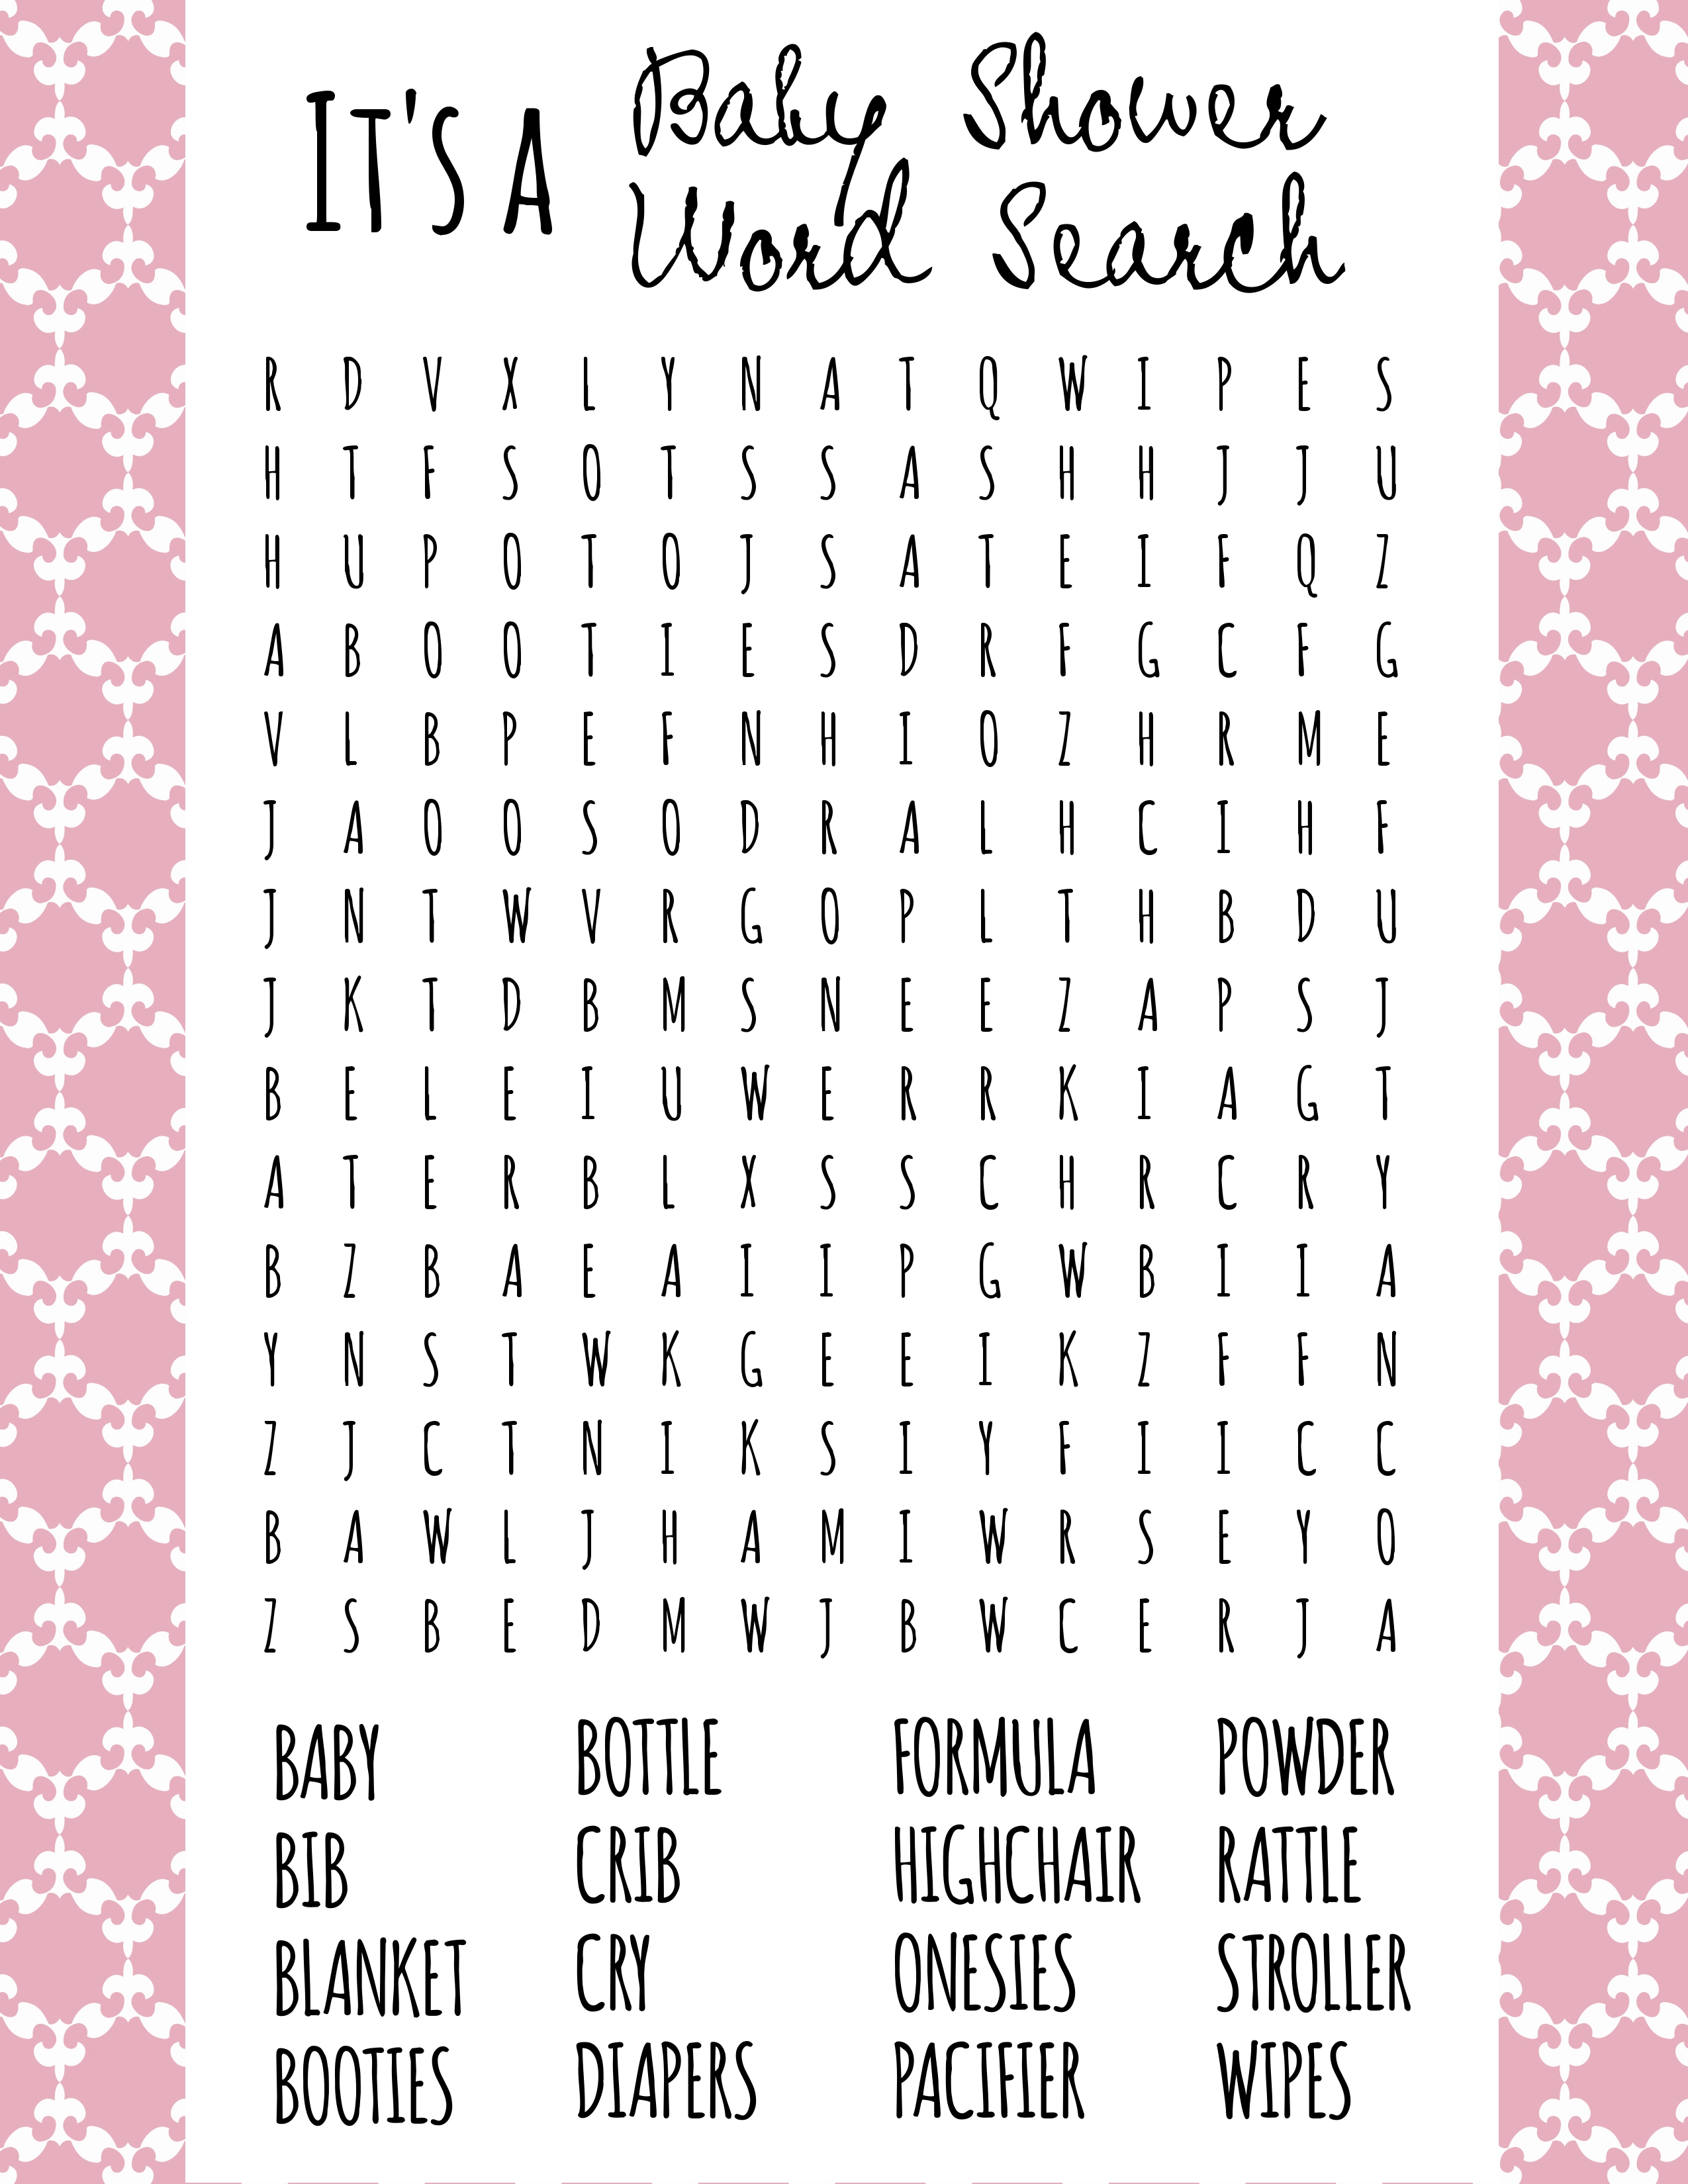 Baby Shower. Baby Shower Word Search: Printable Baby Shower Word - Printable Baby Shower Crossword Puzzle Game